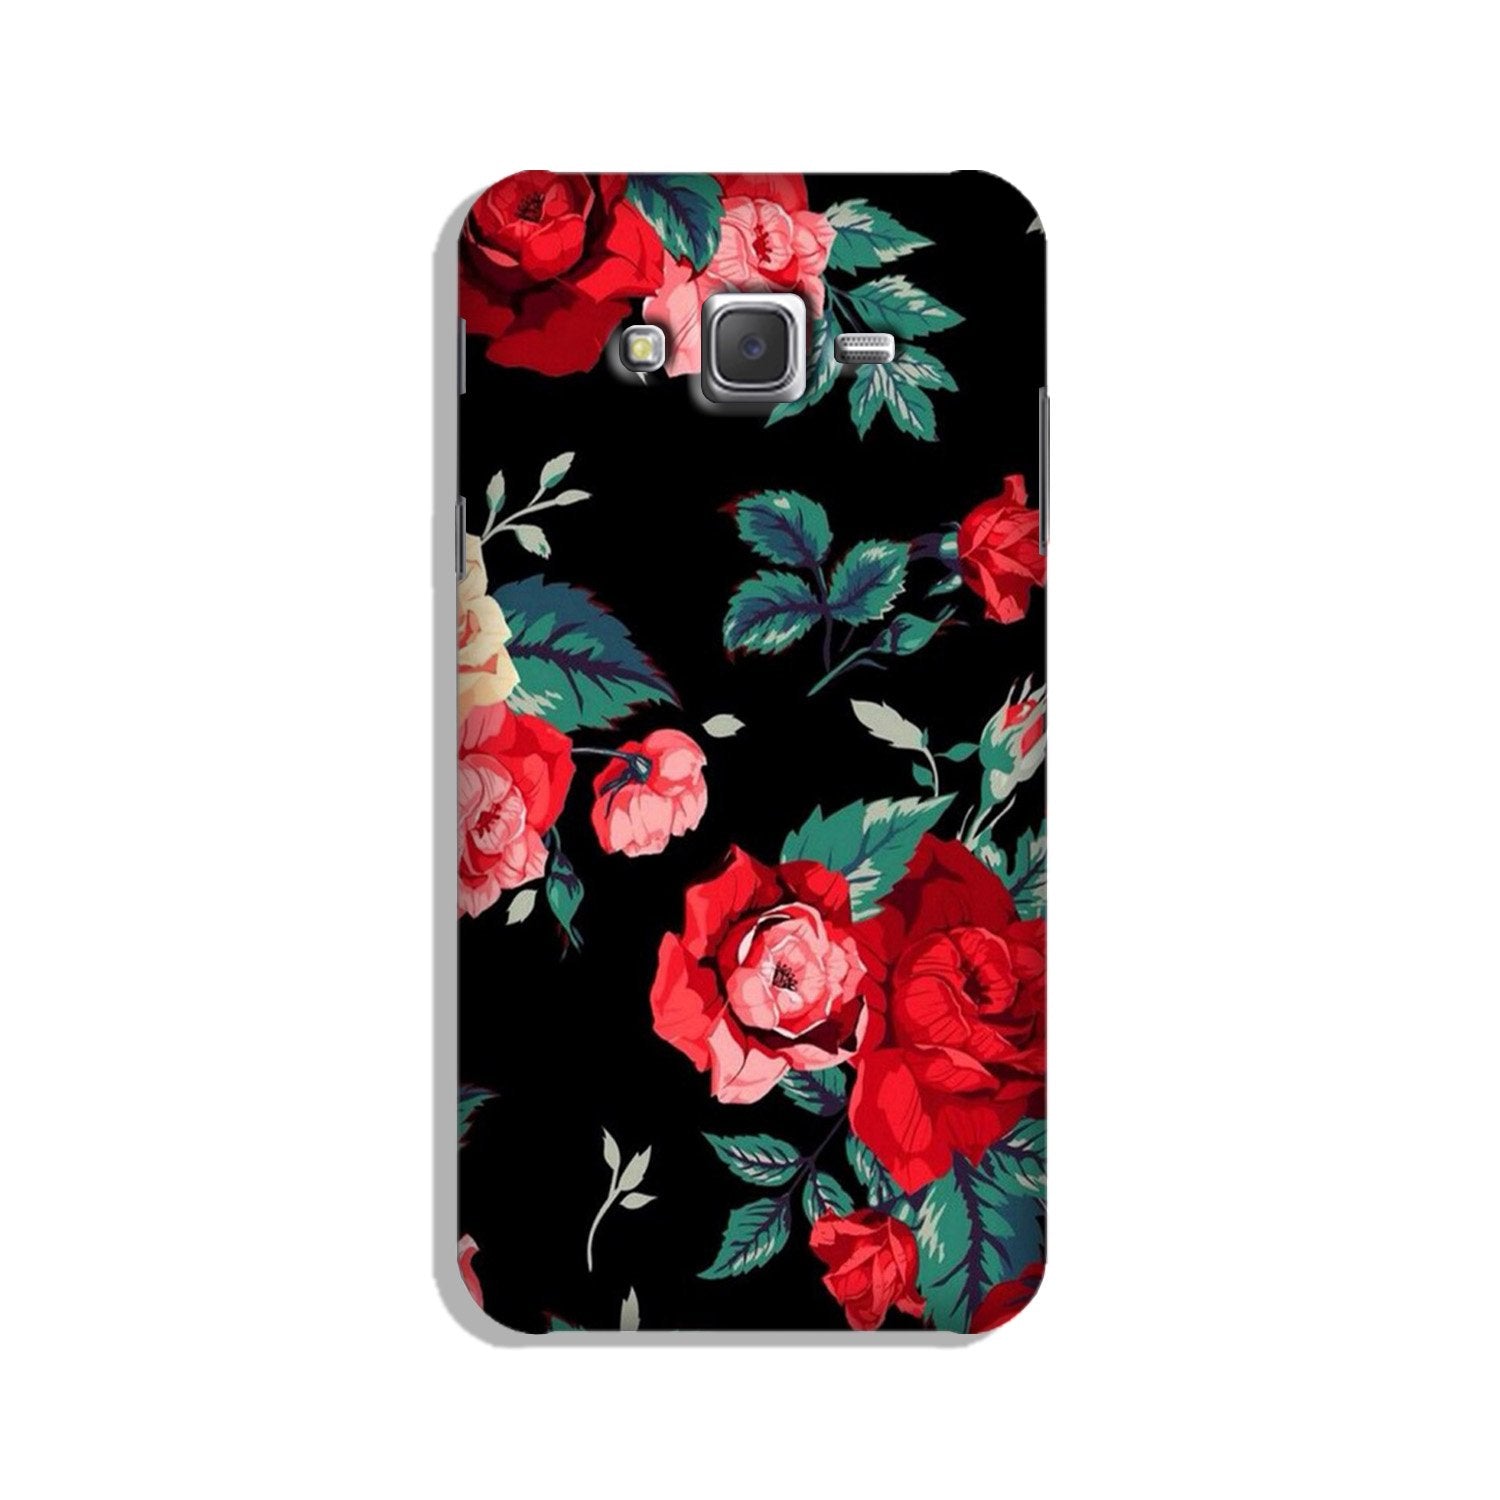 Red Rose2 Case for Galaxy J5 (2015)